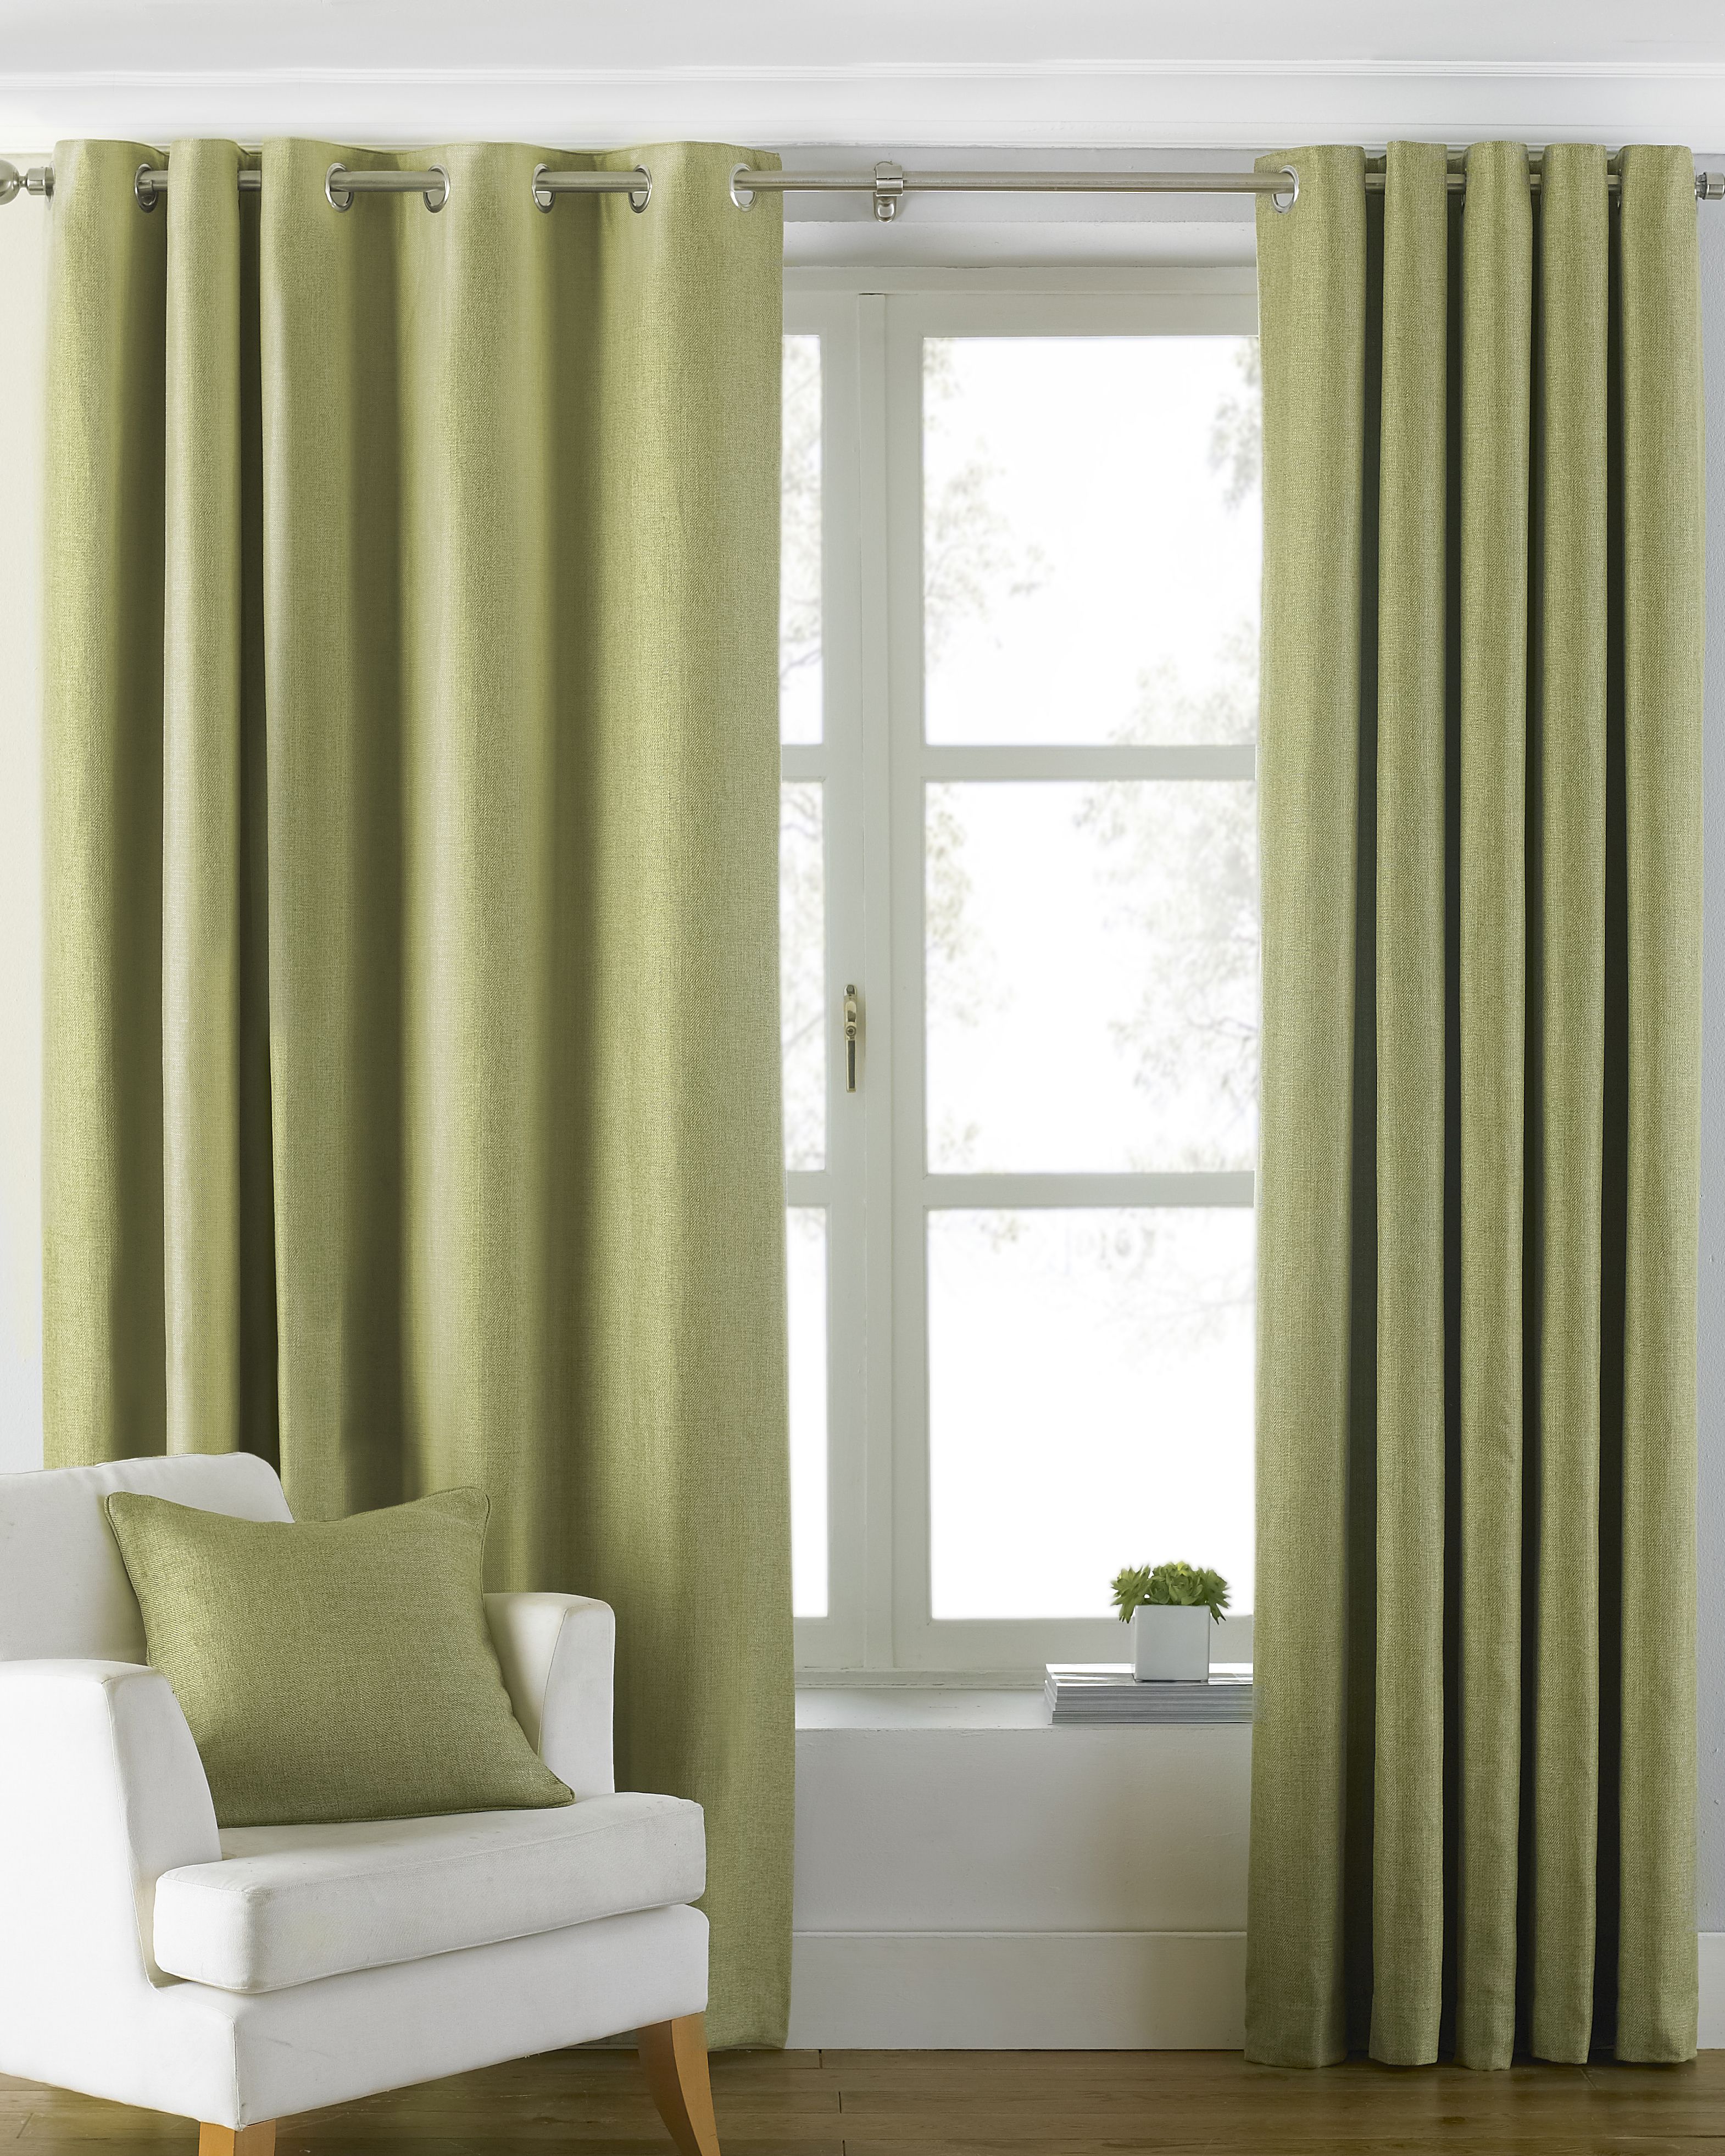 The Atlantic curtains feature a plain twill woven fabric in a range of earthy tones to suit any home style.  Made of 100% robust polyester these curtains don’t stain easily. With stainless steel eyelet holes the Atlantic curtains are easy to hang and only require a curtain pole for installation and come in a range of sizes to fit any window area.